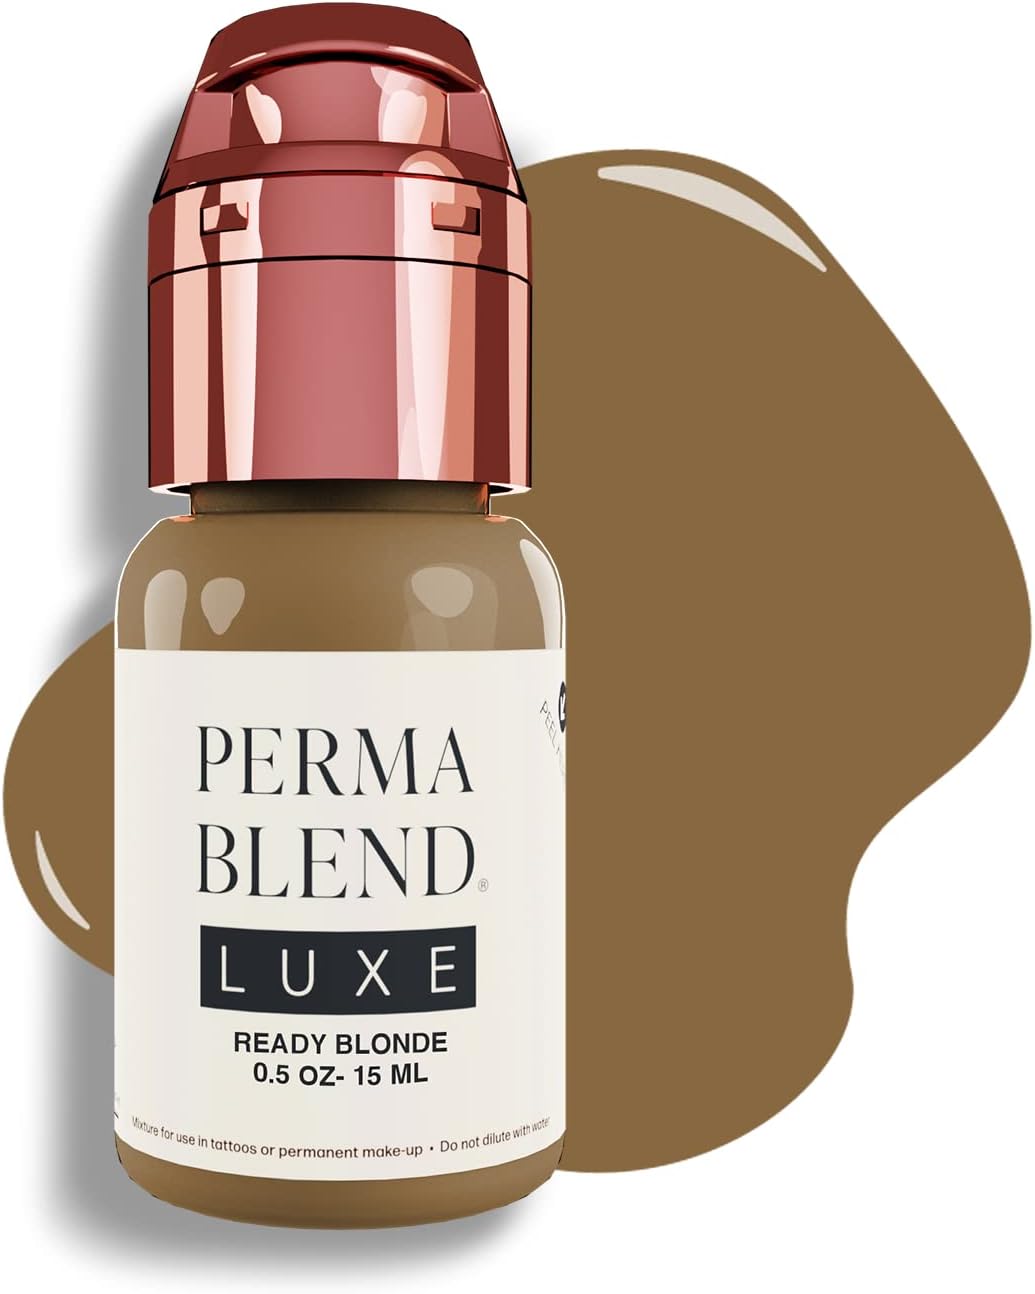 perma blend luxe ready blonde tattoo ink review